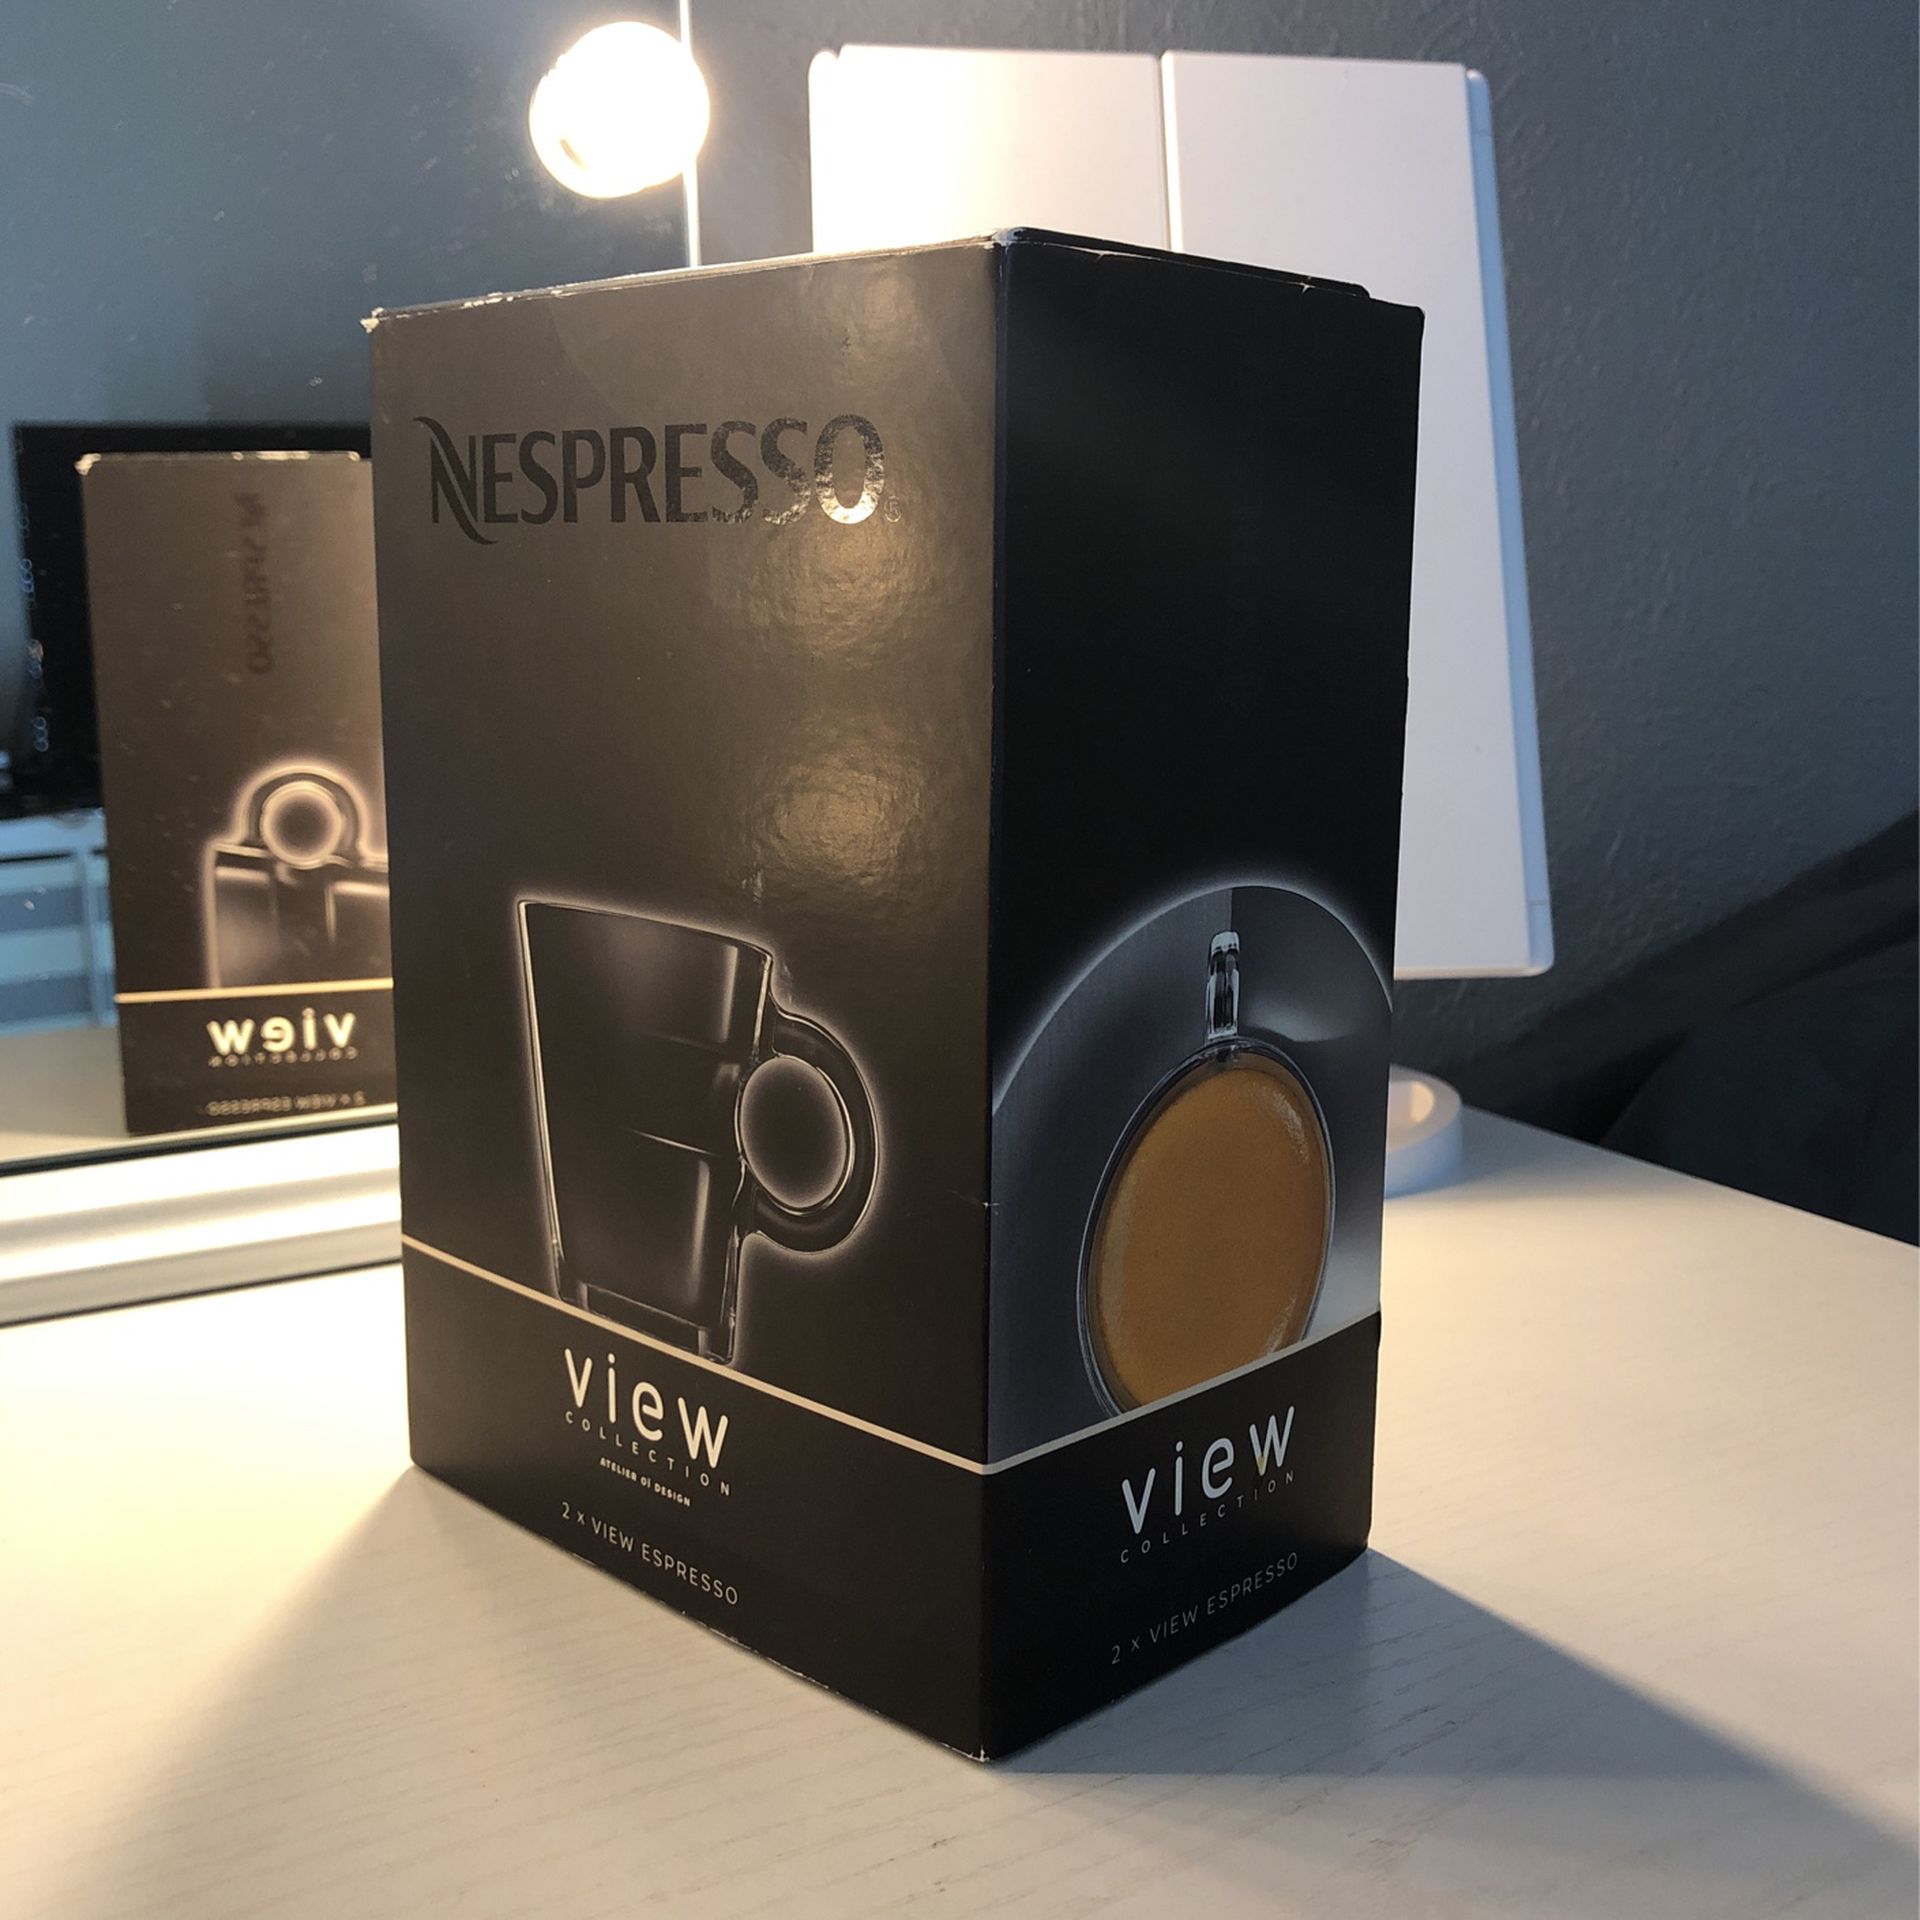 NESPRESSO VIEW COLLECTION ESPRESSO CUPS + SAUCERS for Sale in